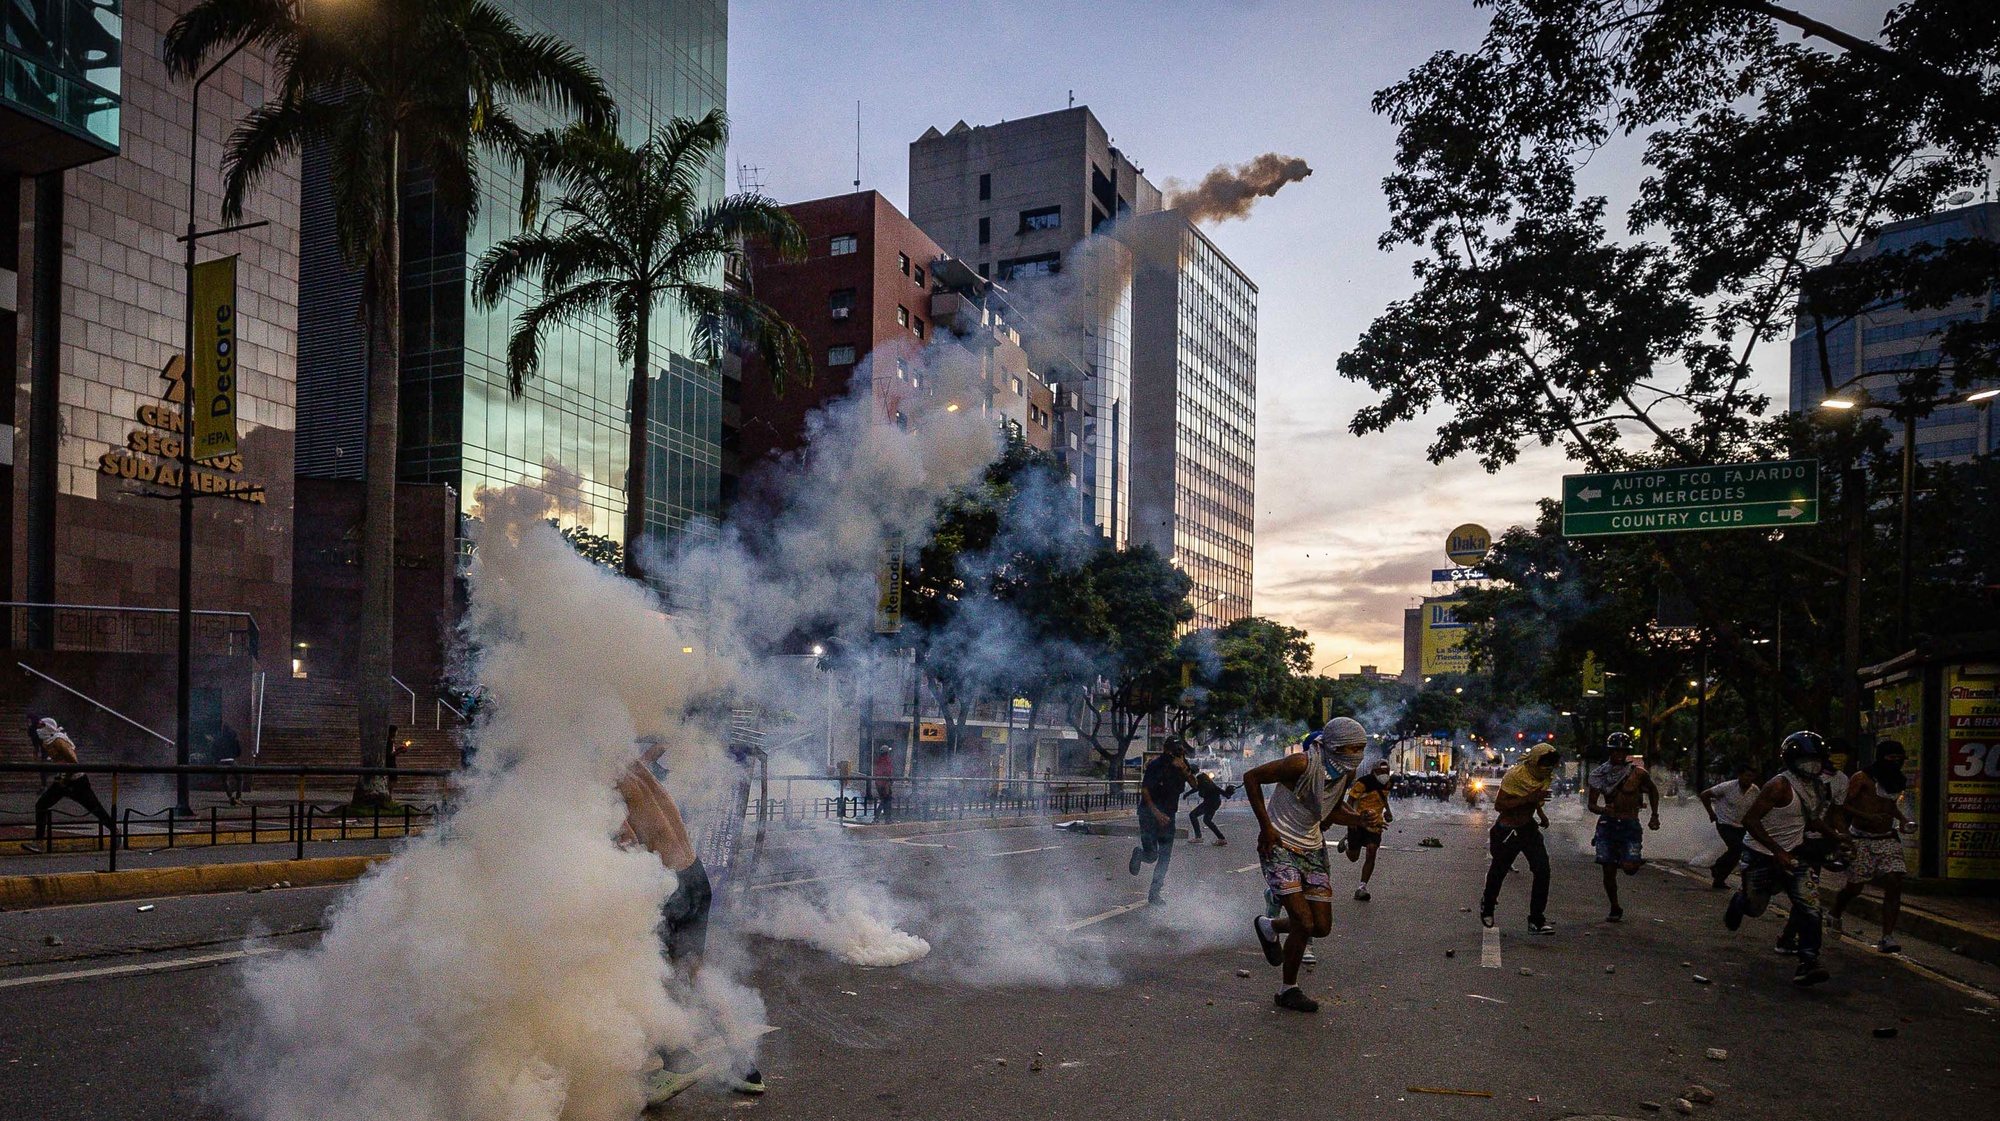 epa11507673 Protesters clash with the Bolivarian National Guard (GNB) over the results of the presidential elections in Caracas, Venezuela, 29 July 2024. Protests are taking place in Caracas after the National Electoral Council (CNE) proclaimed that Nicolas Maduro was re-elected president of Venezuela, following elections held on 28 July. Thousands of citizens have come out to protest against the results announced by the National Electoral Council (CNE), which gave President Maduro 51.2% of the votes, a figure questioned by the opposition and by a good part of the international community. Opposition leader Maria Corina Machado claims they have obtained enough of the vote tallies to prove they won the presidential elections that took place on 28 July.  EPA/Henry Chirinos